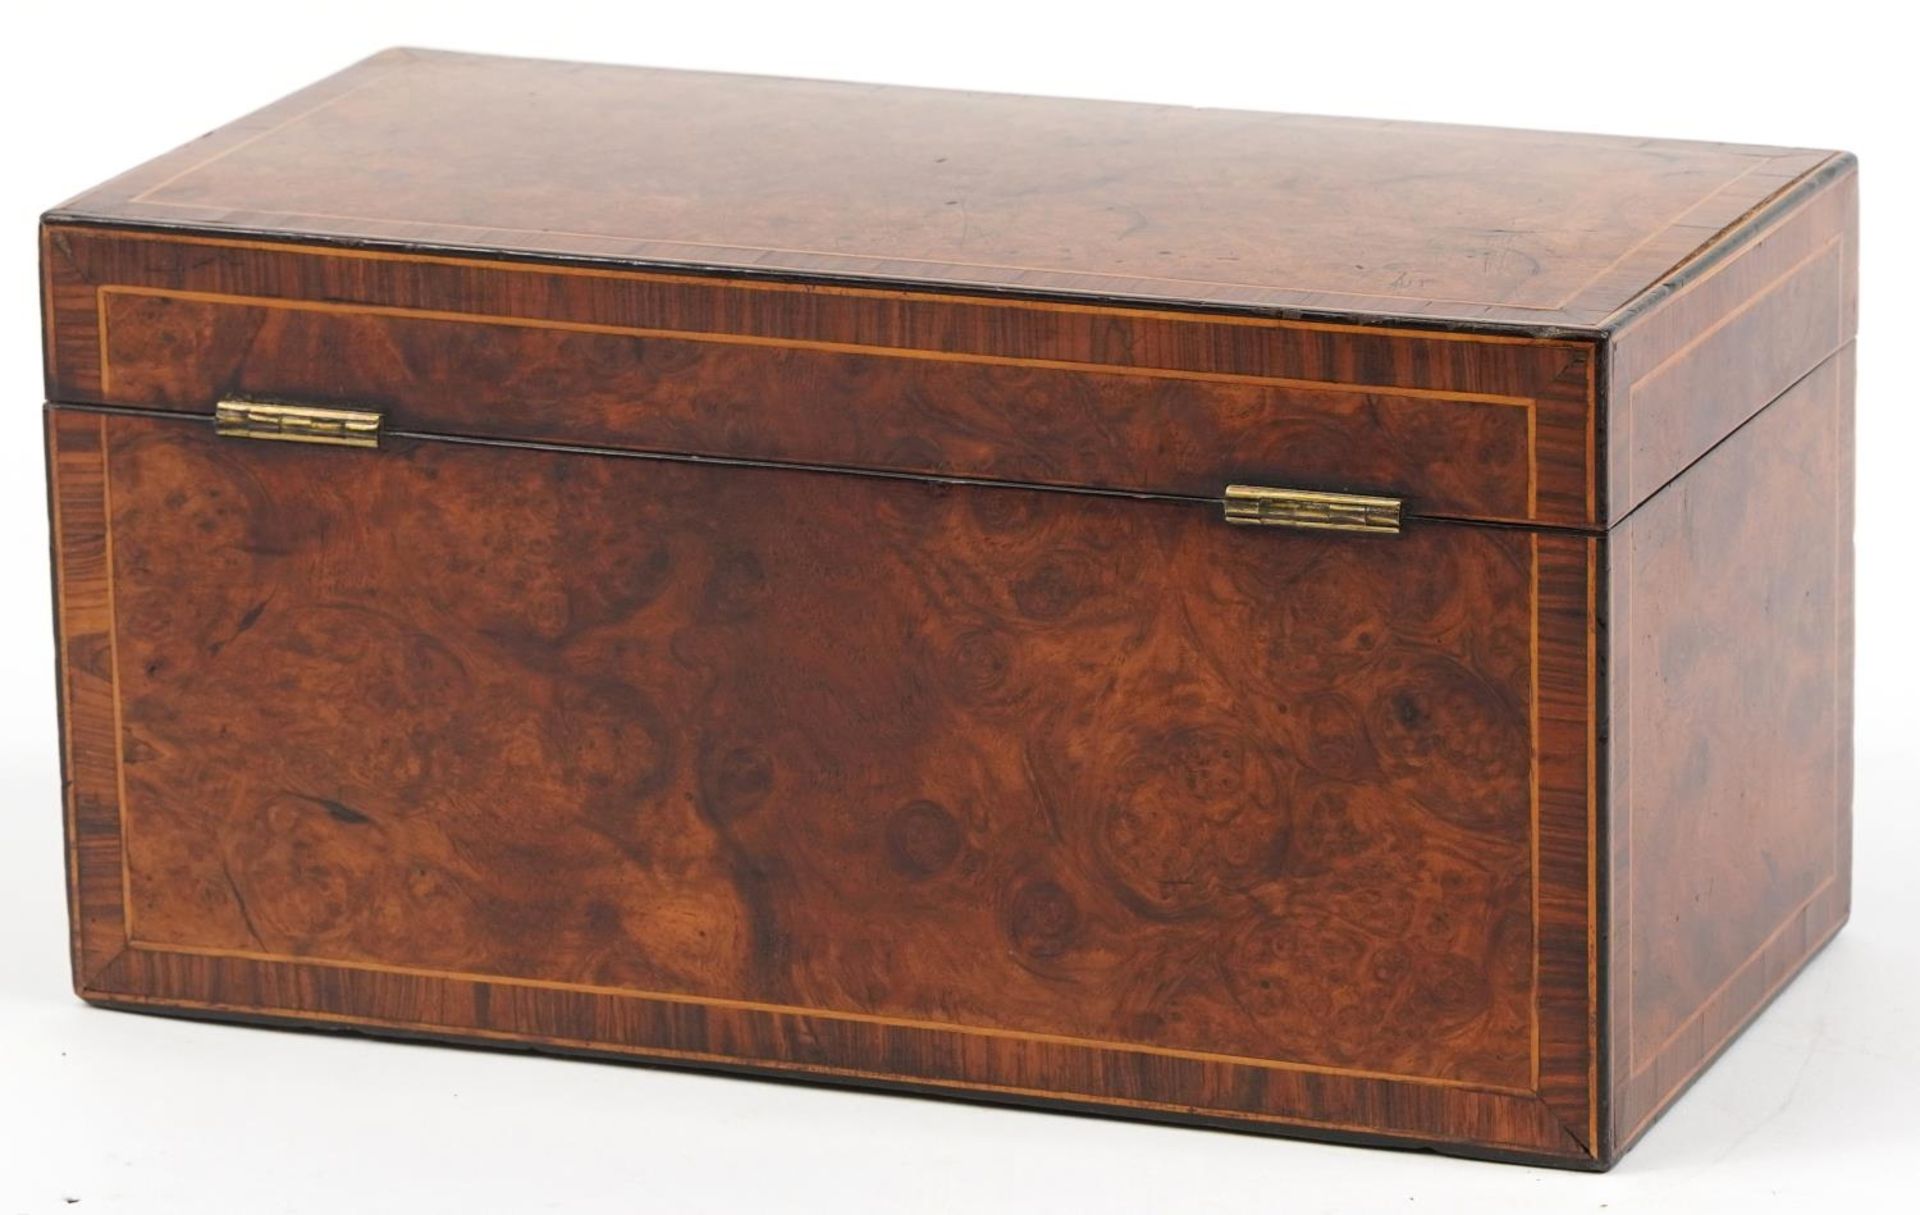 Early 19th century burr yew and walnut tea caddy with twin divisional interior having lidded - Bild 3 aus 4